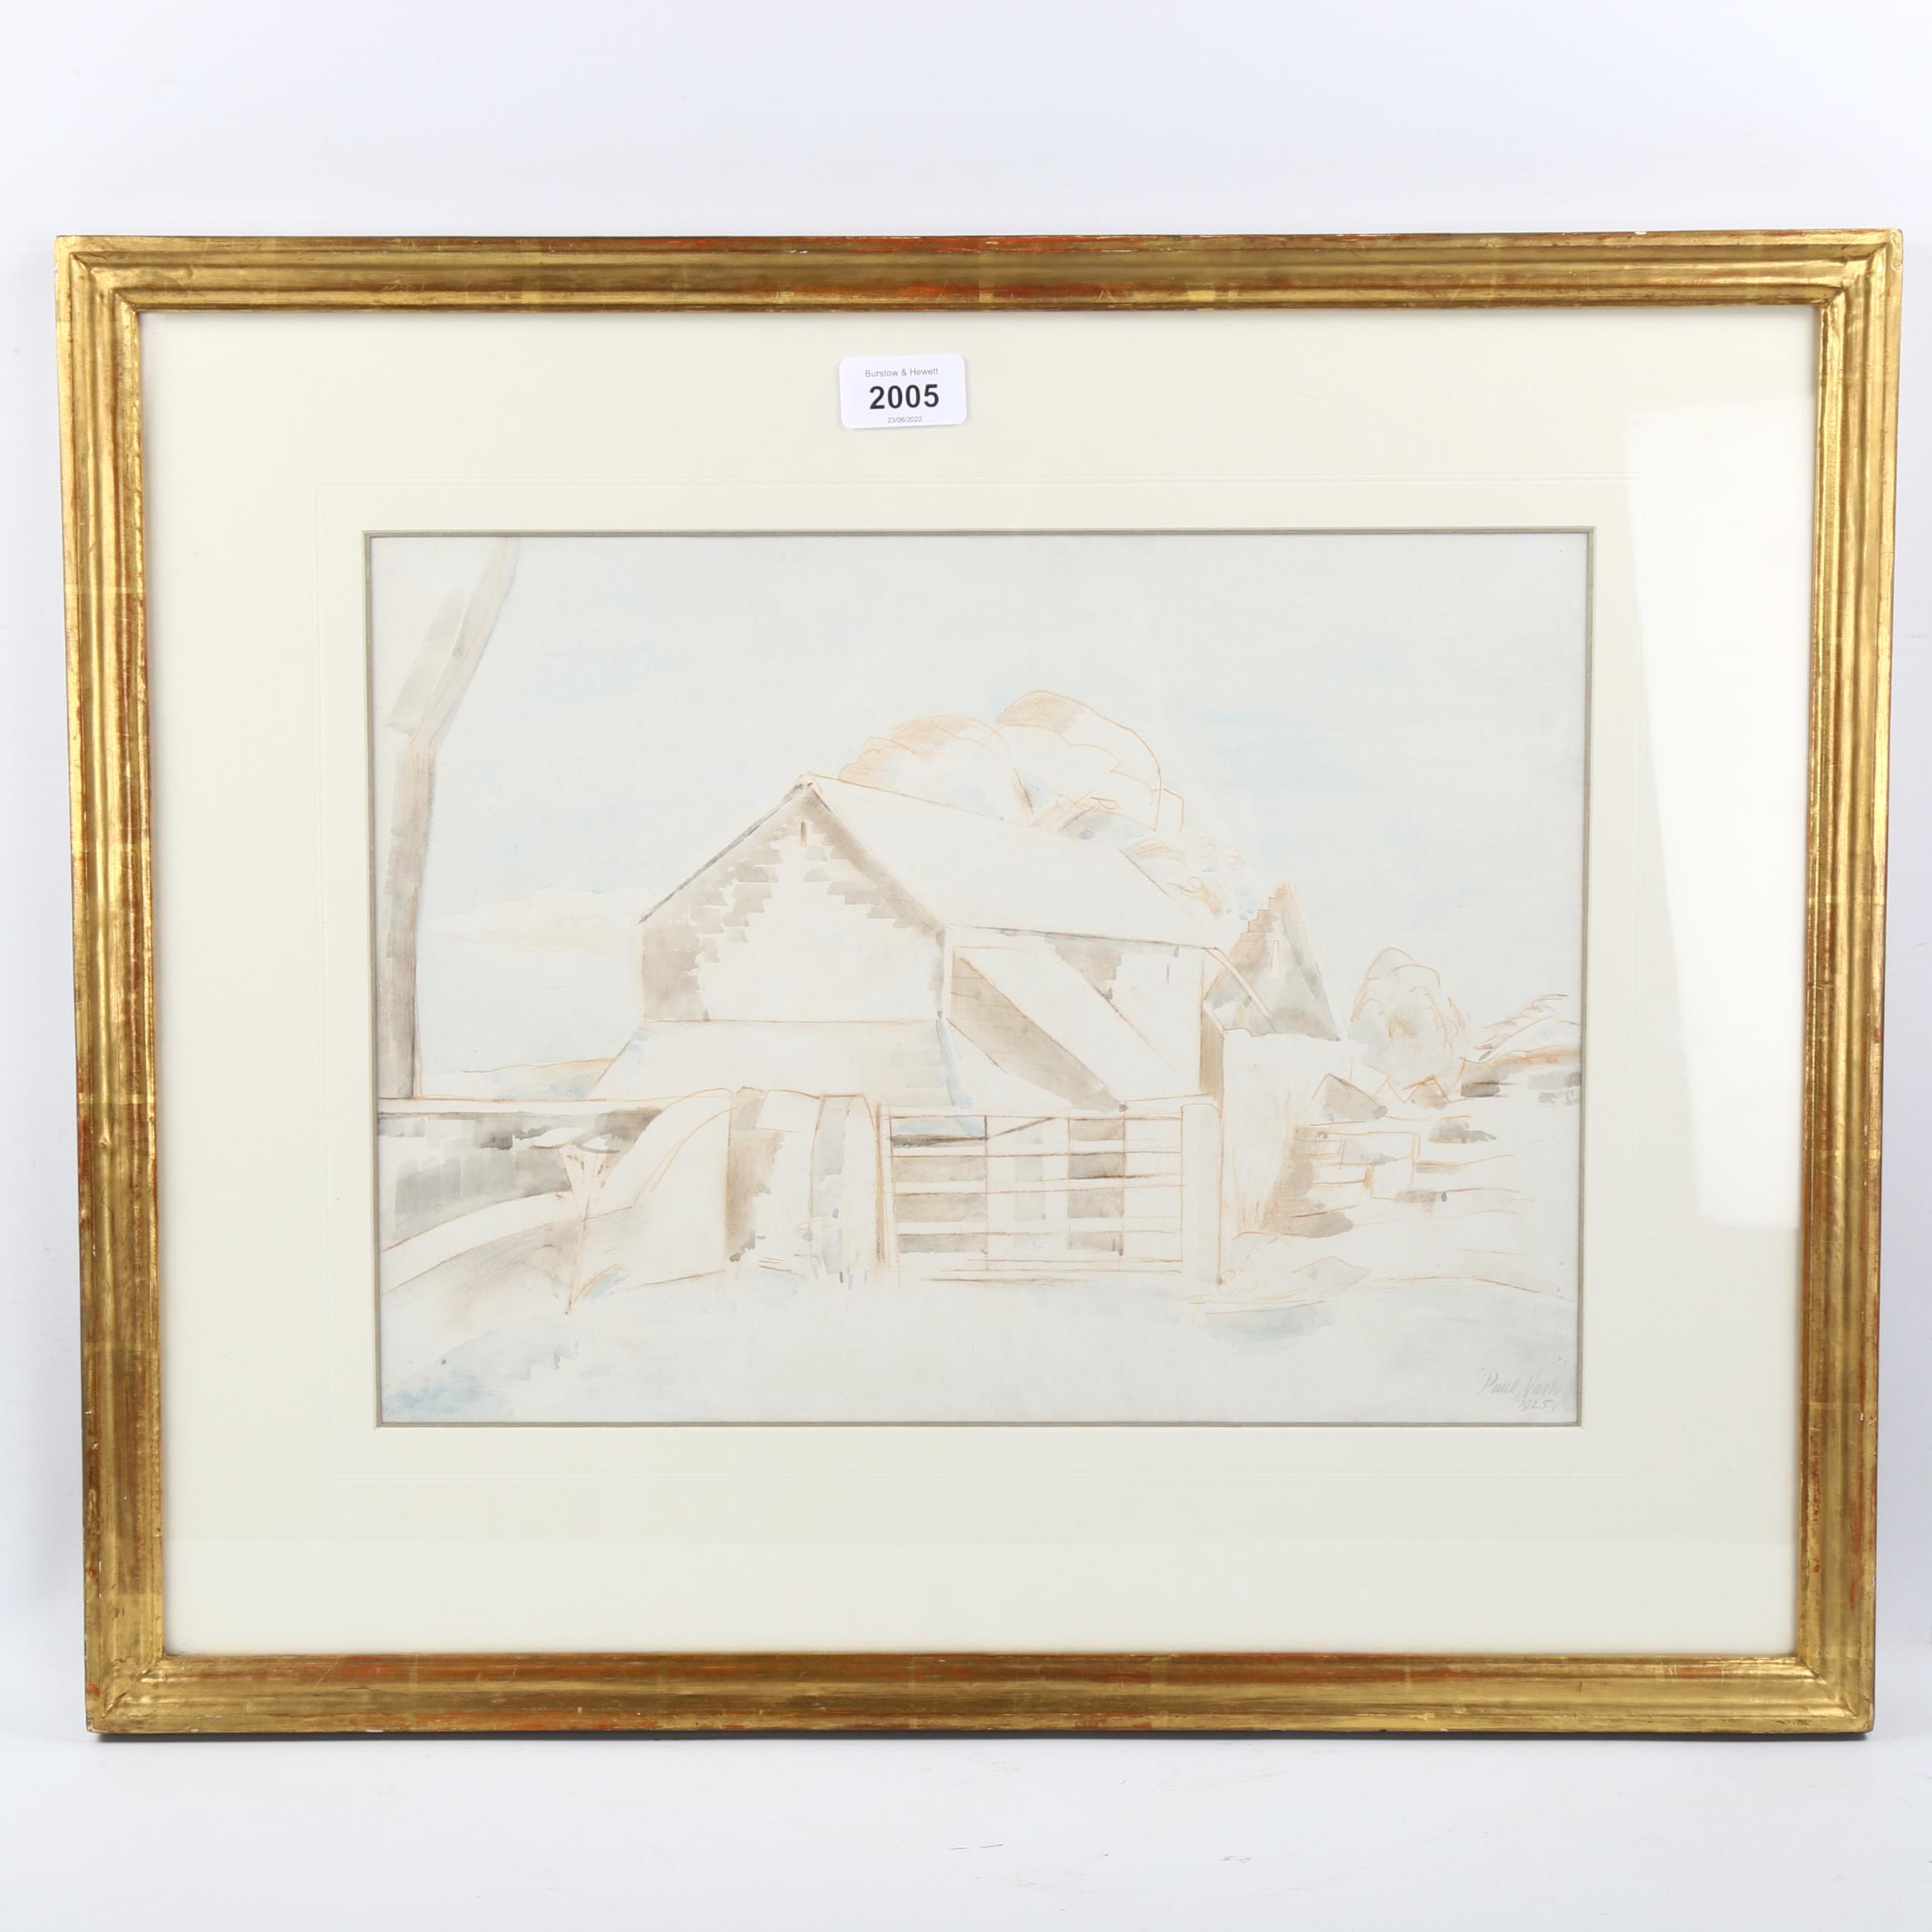 Paul Nash (1889 - 1946), watercolour/conte crayon on paper, farm buildings, signed and dated 1925, - Image 3 of 4